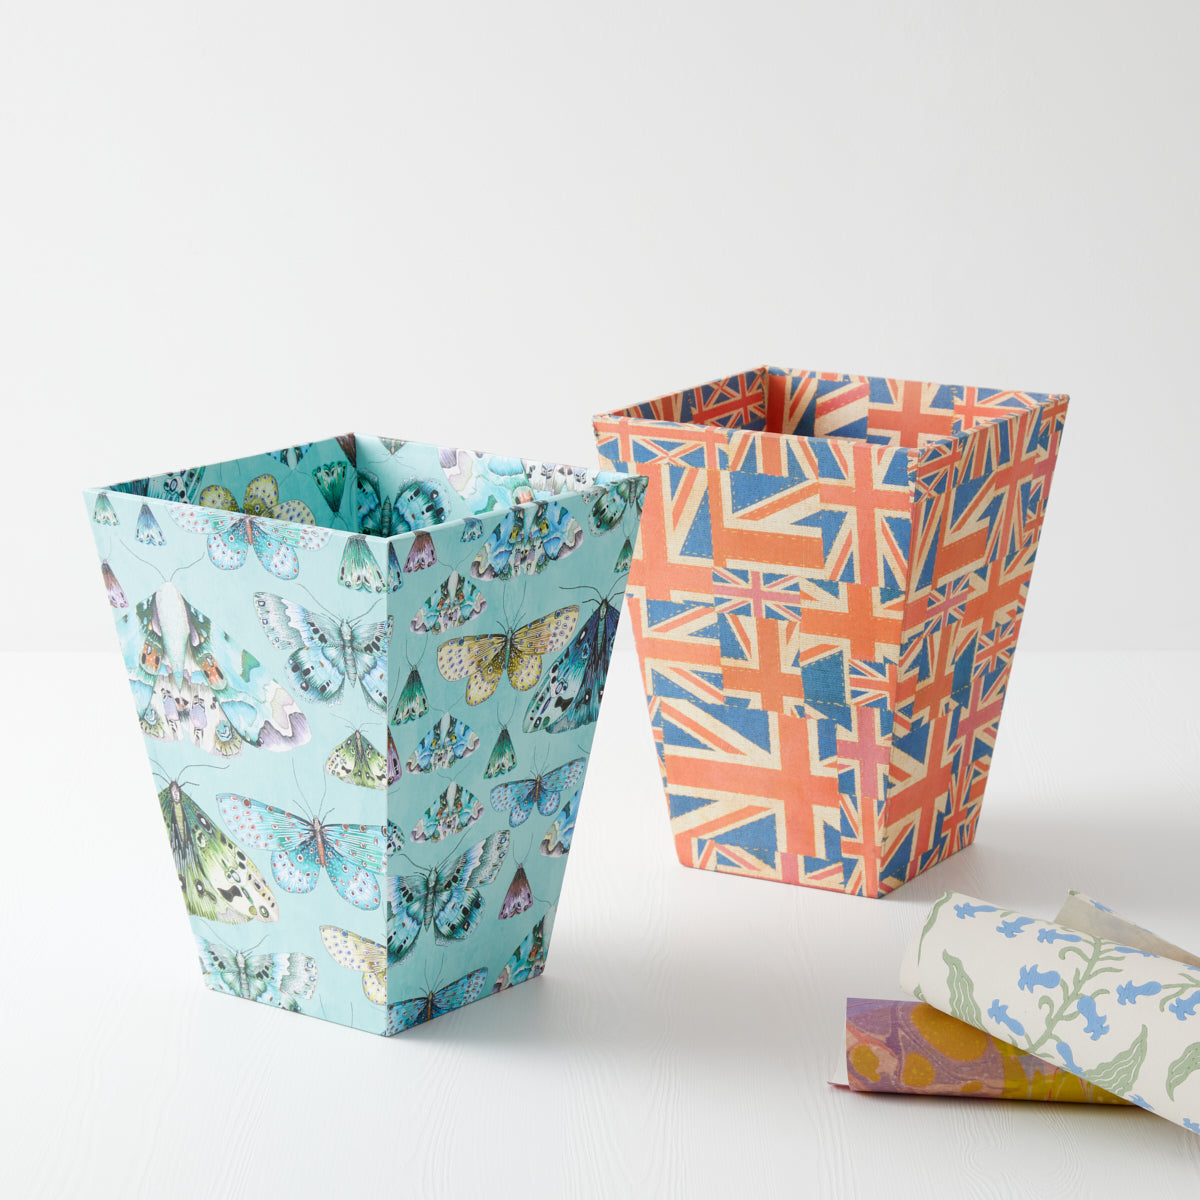 Send Your Own Paper Waste Paper Bins